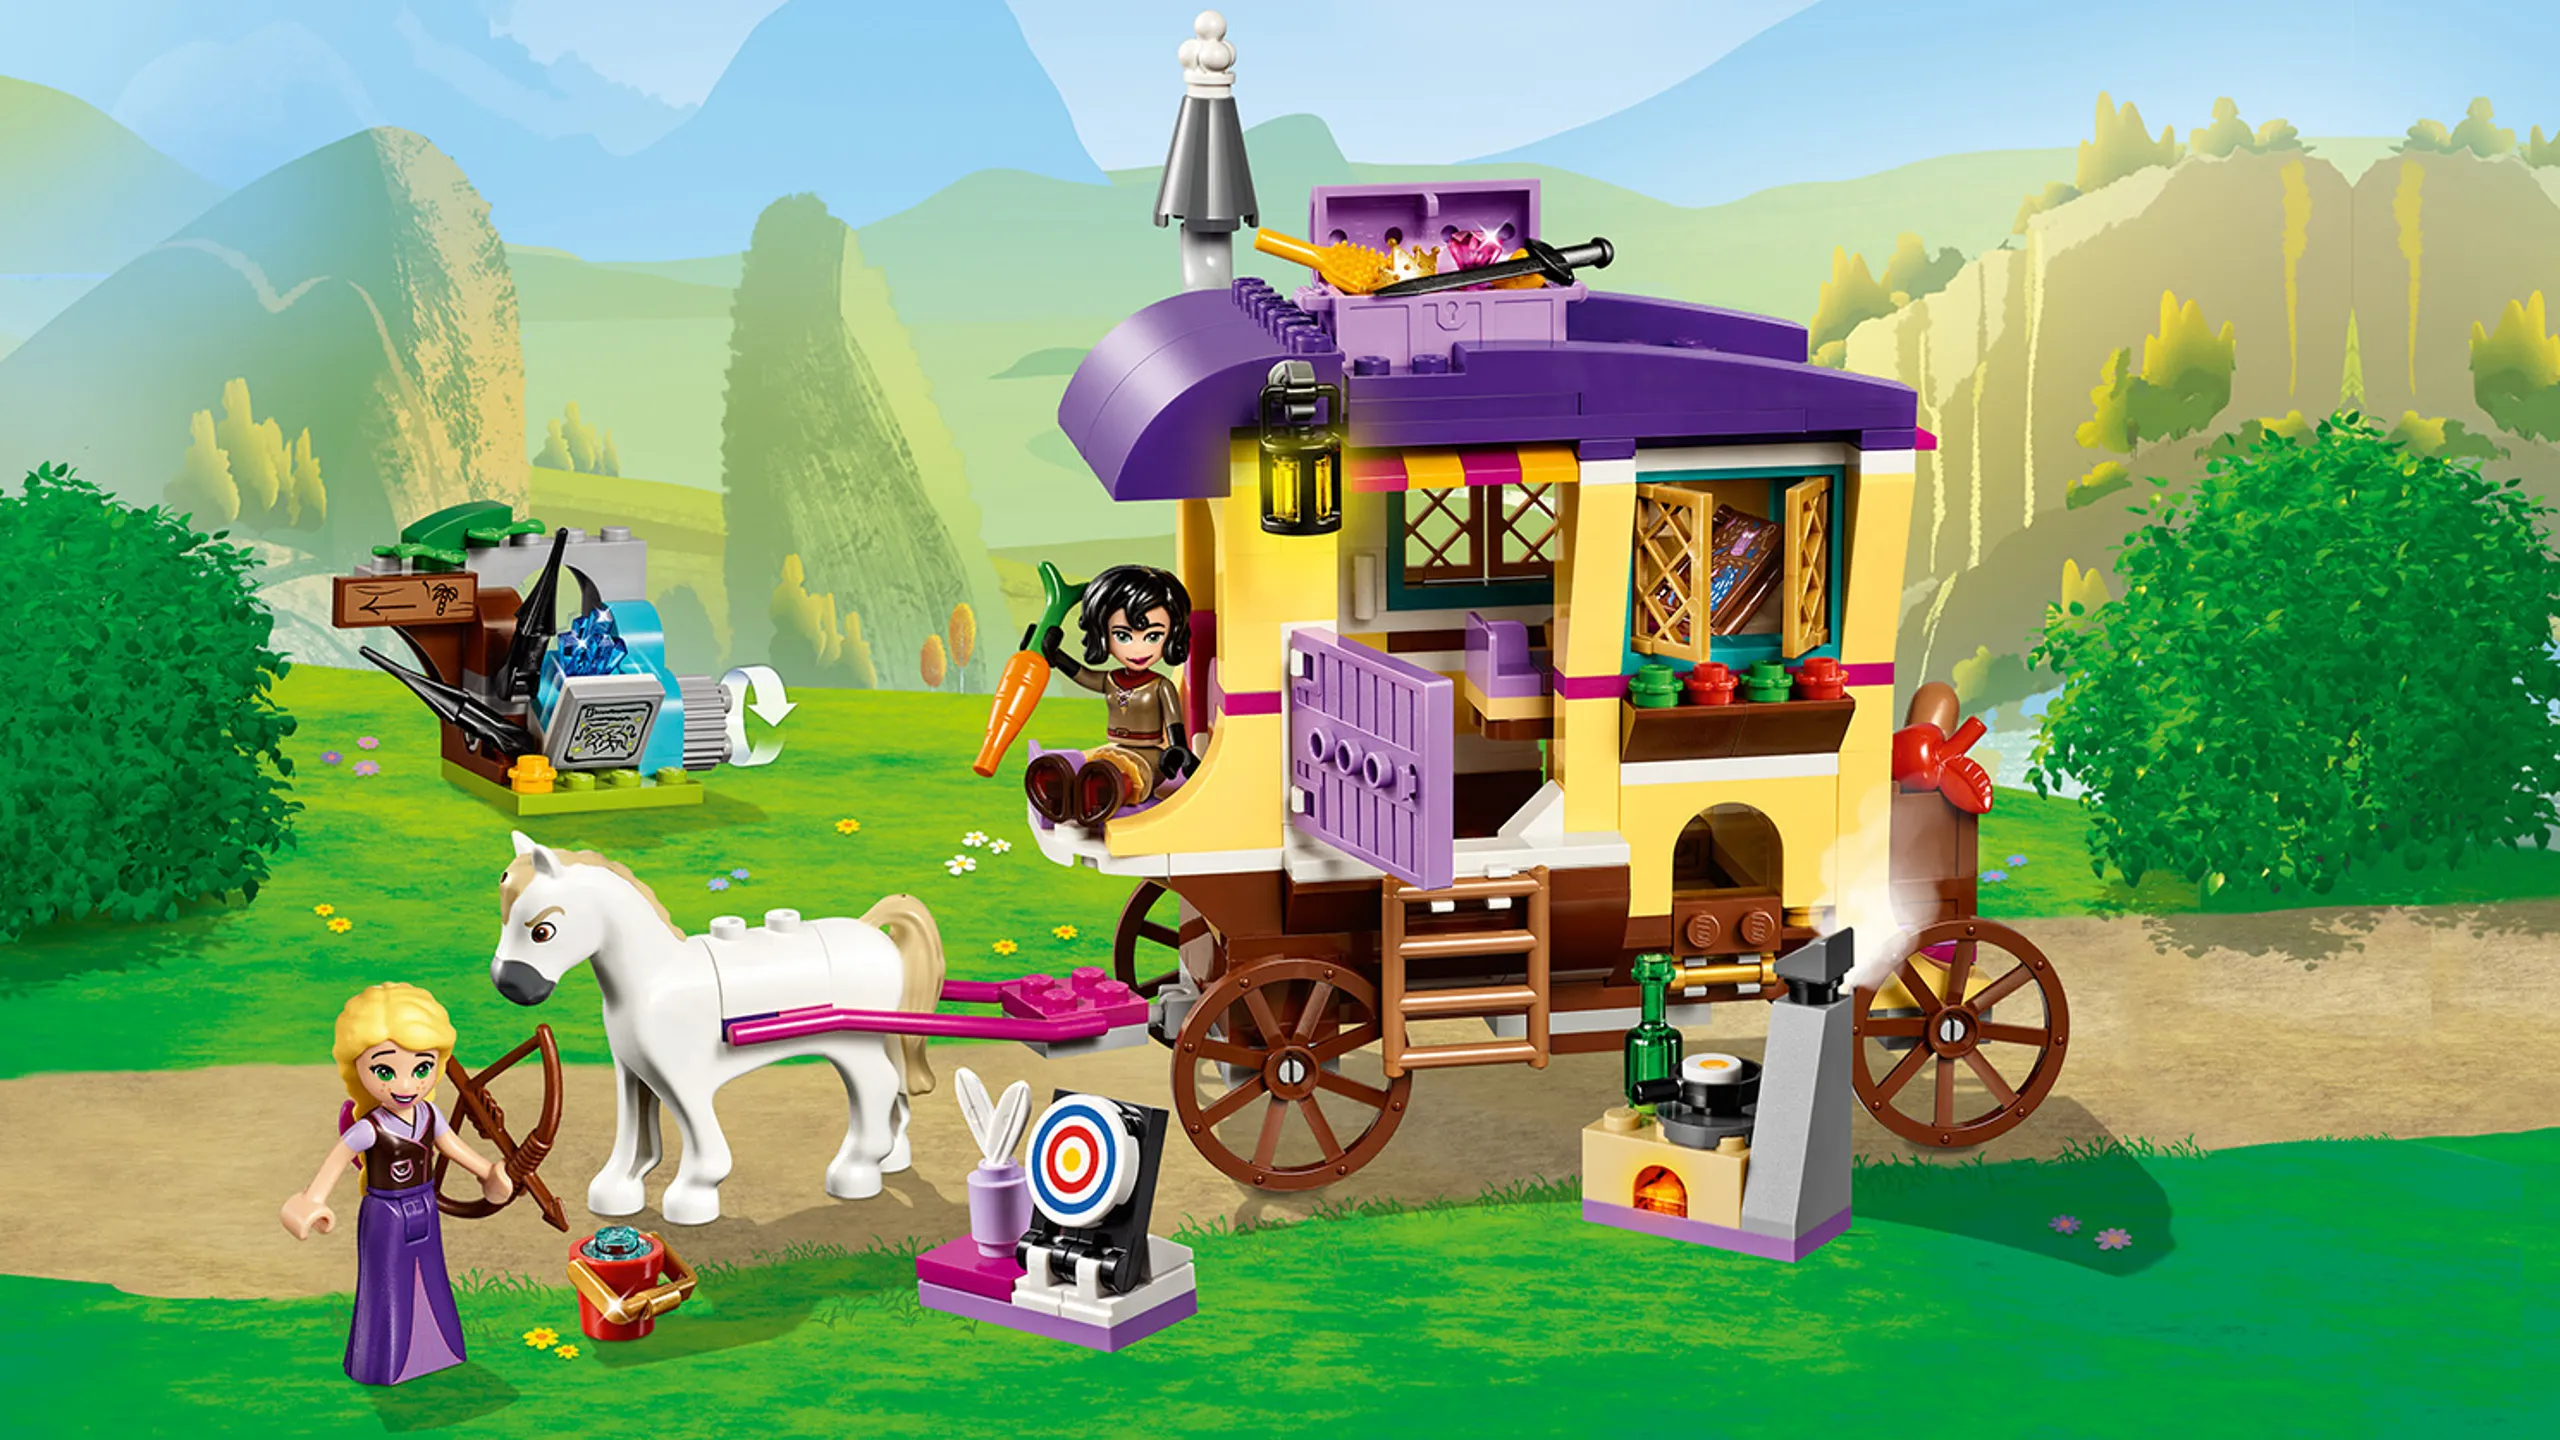 LEGO Disney - 41157 Rapunzel's Travelling Caravan - Rapunzel practice shooting with her bow while her protector Cassandra is driving the caravan with Maximus the horse.